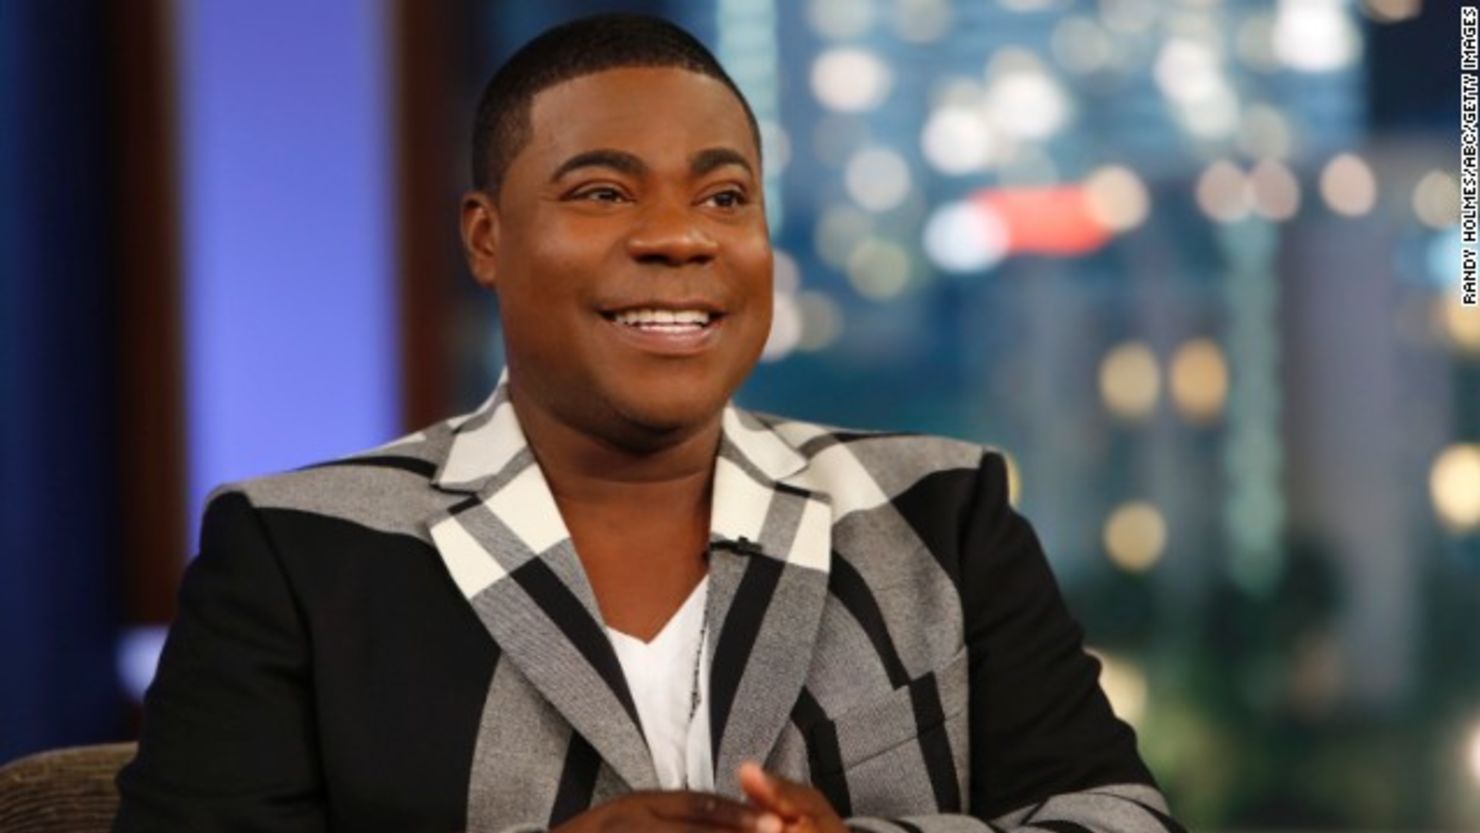 CNNE 14ad9271 - 140607130939-tracy-morgan-new-restricted-story-top